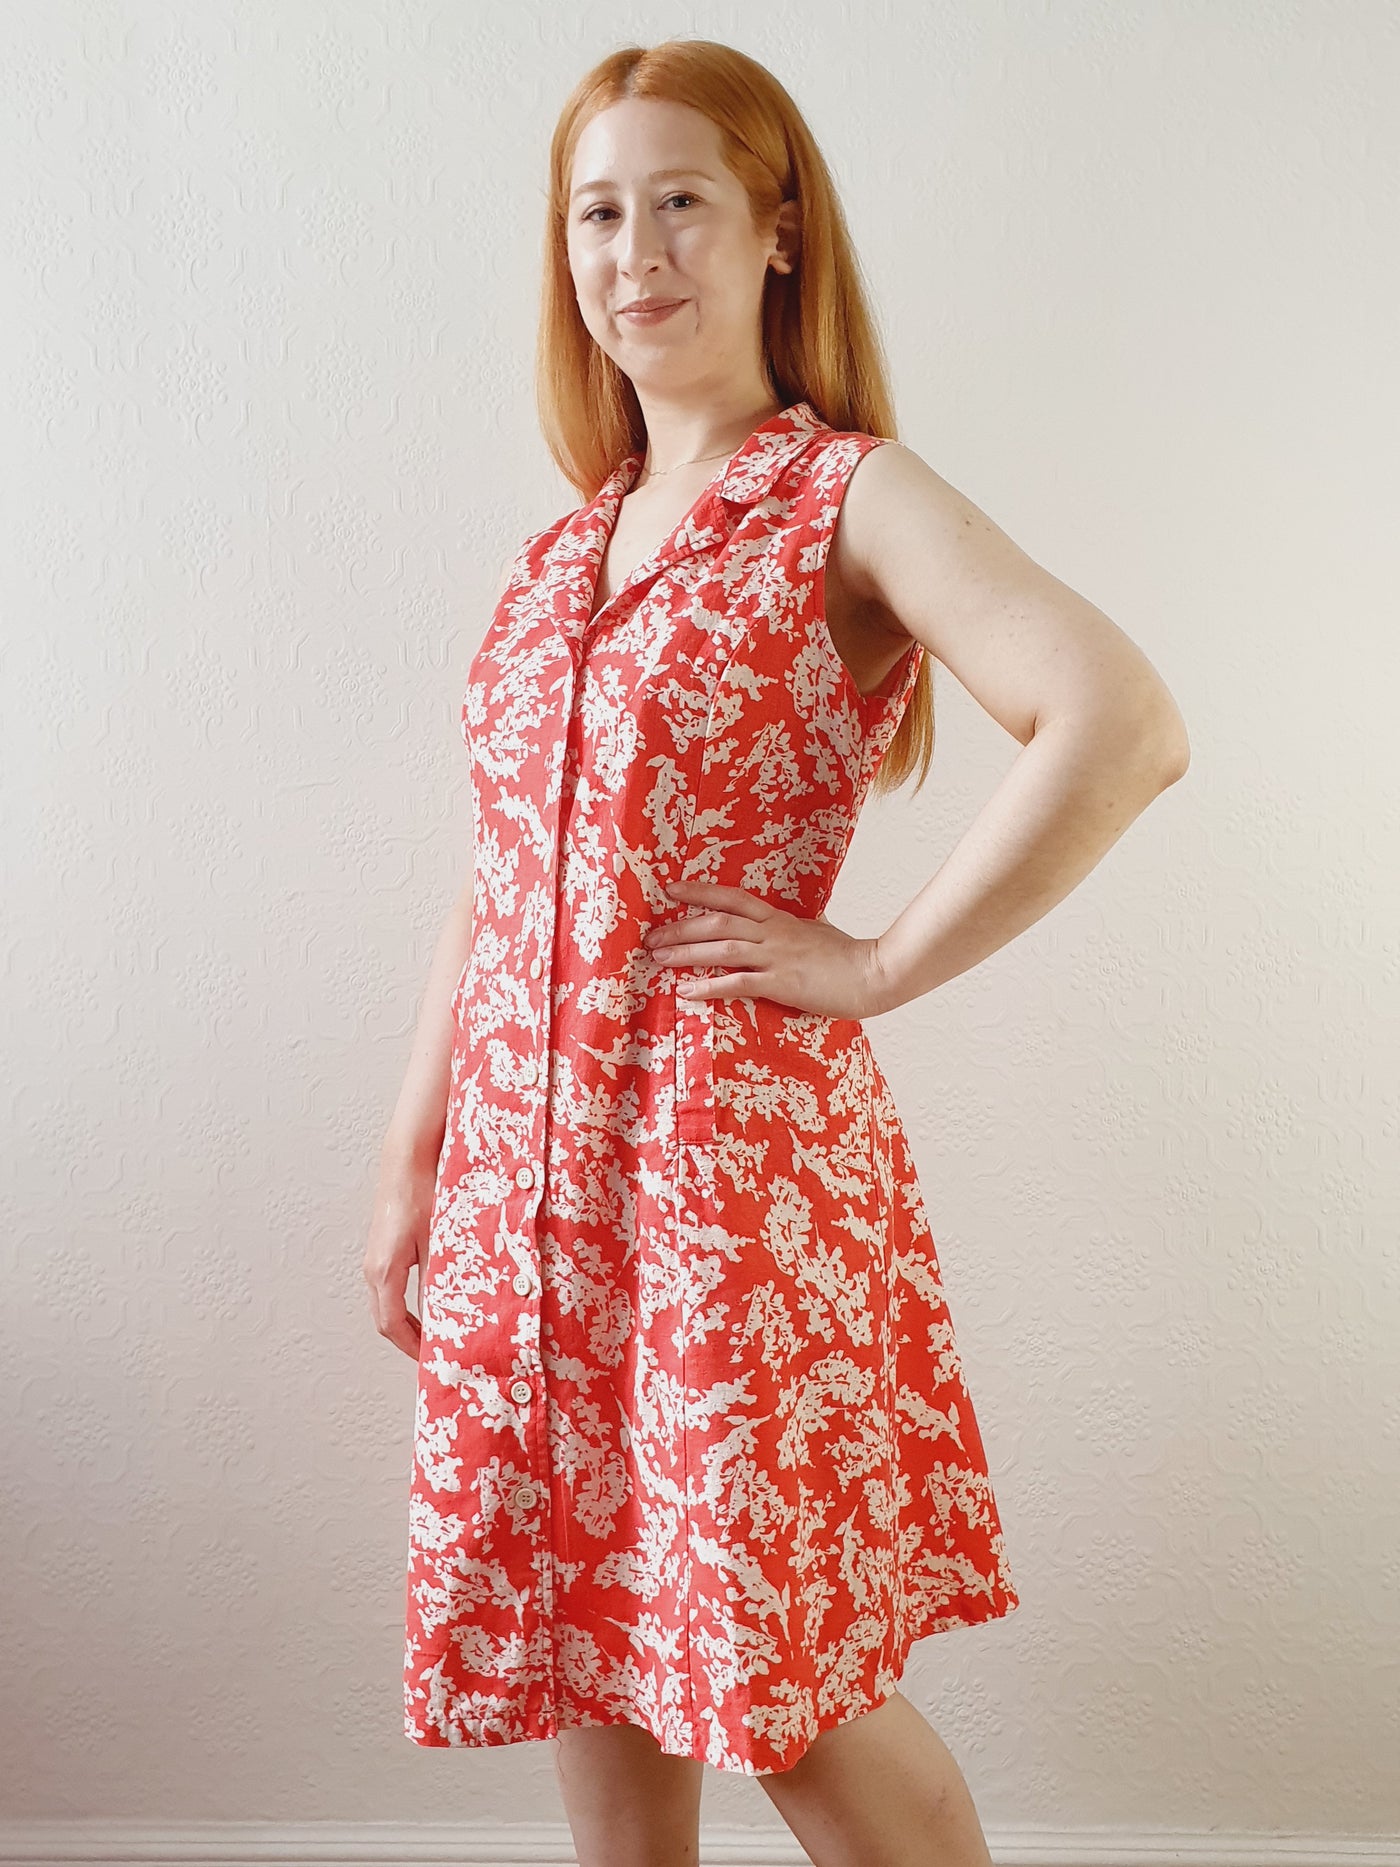 Red & White Floral Linen Dress - M